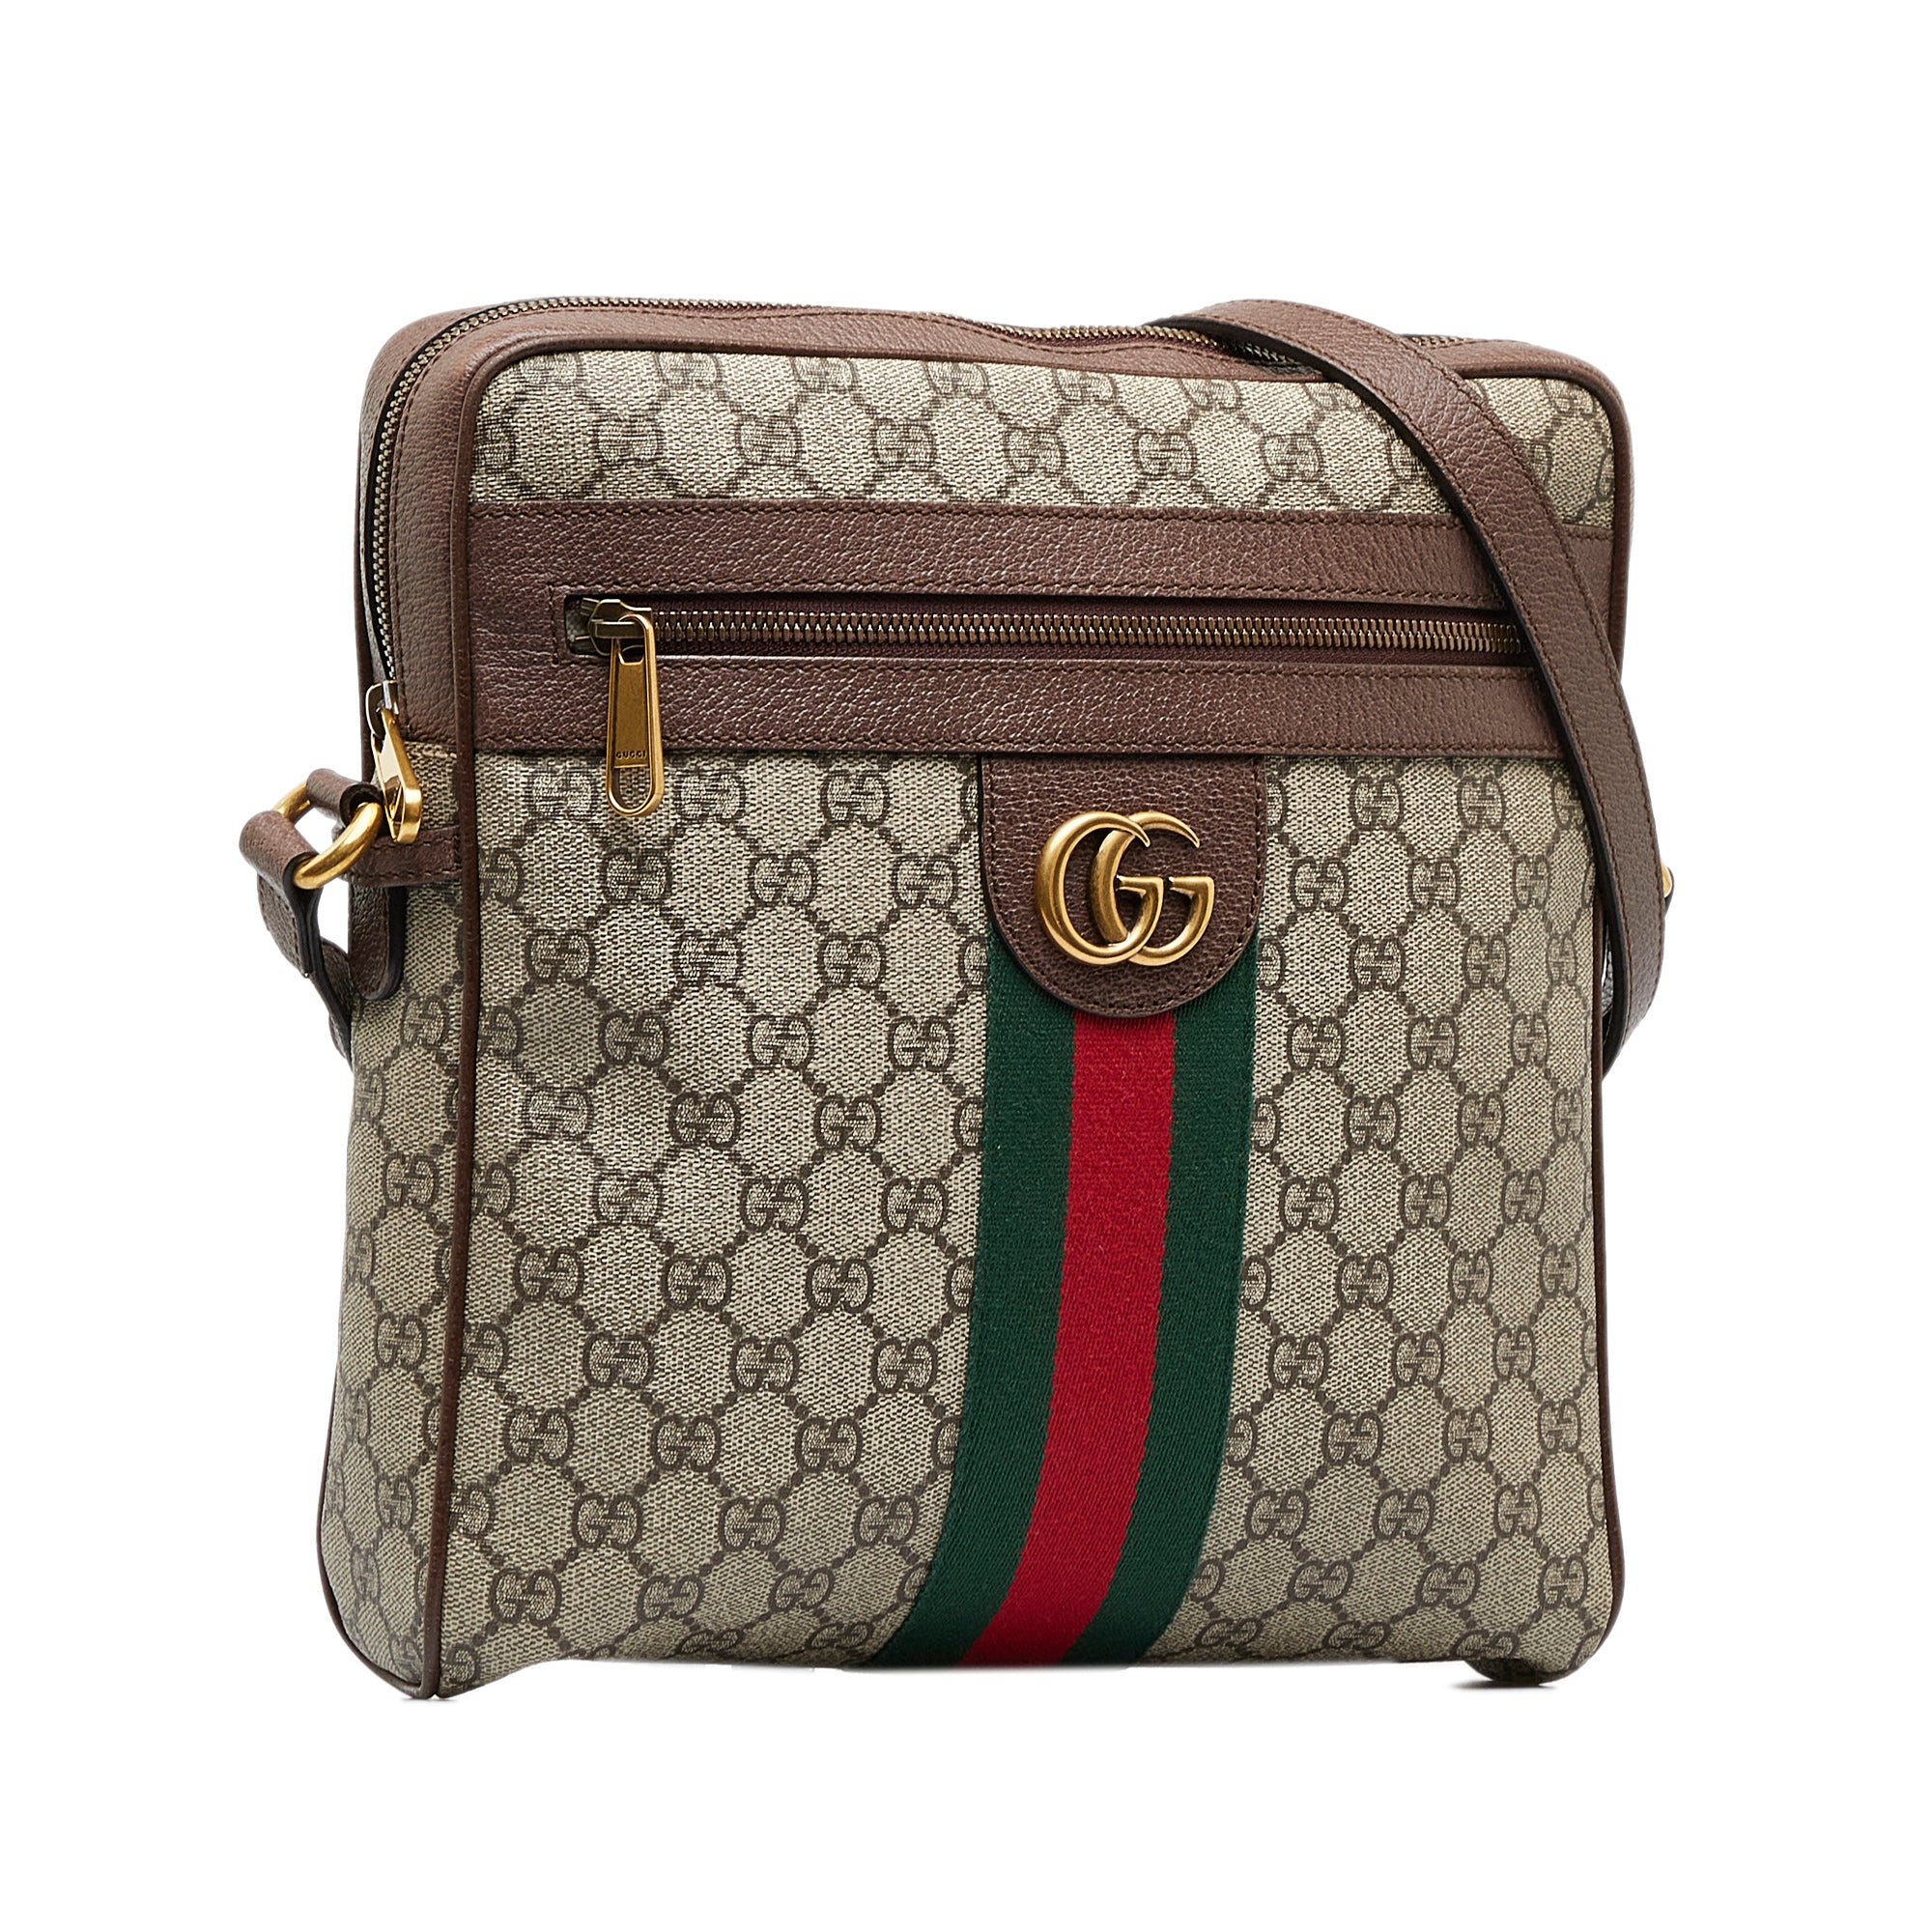 Gucci GG Supreme Large Ophidia Duffle Bag - Brown Luggage and